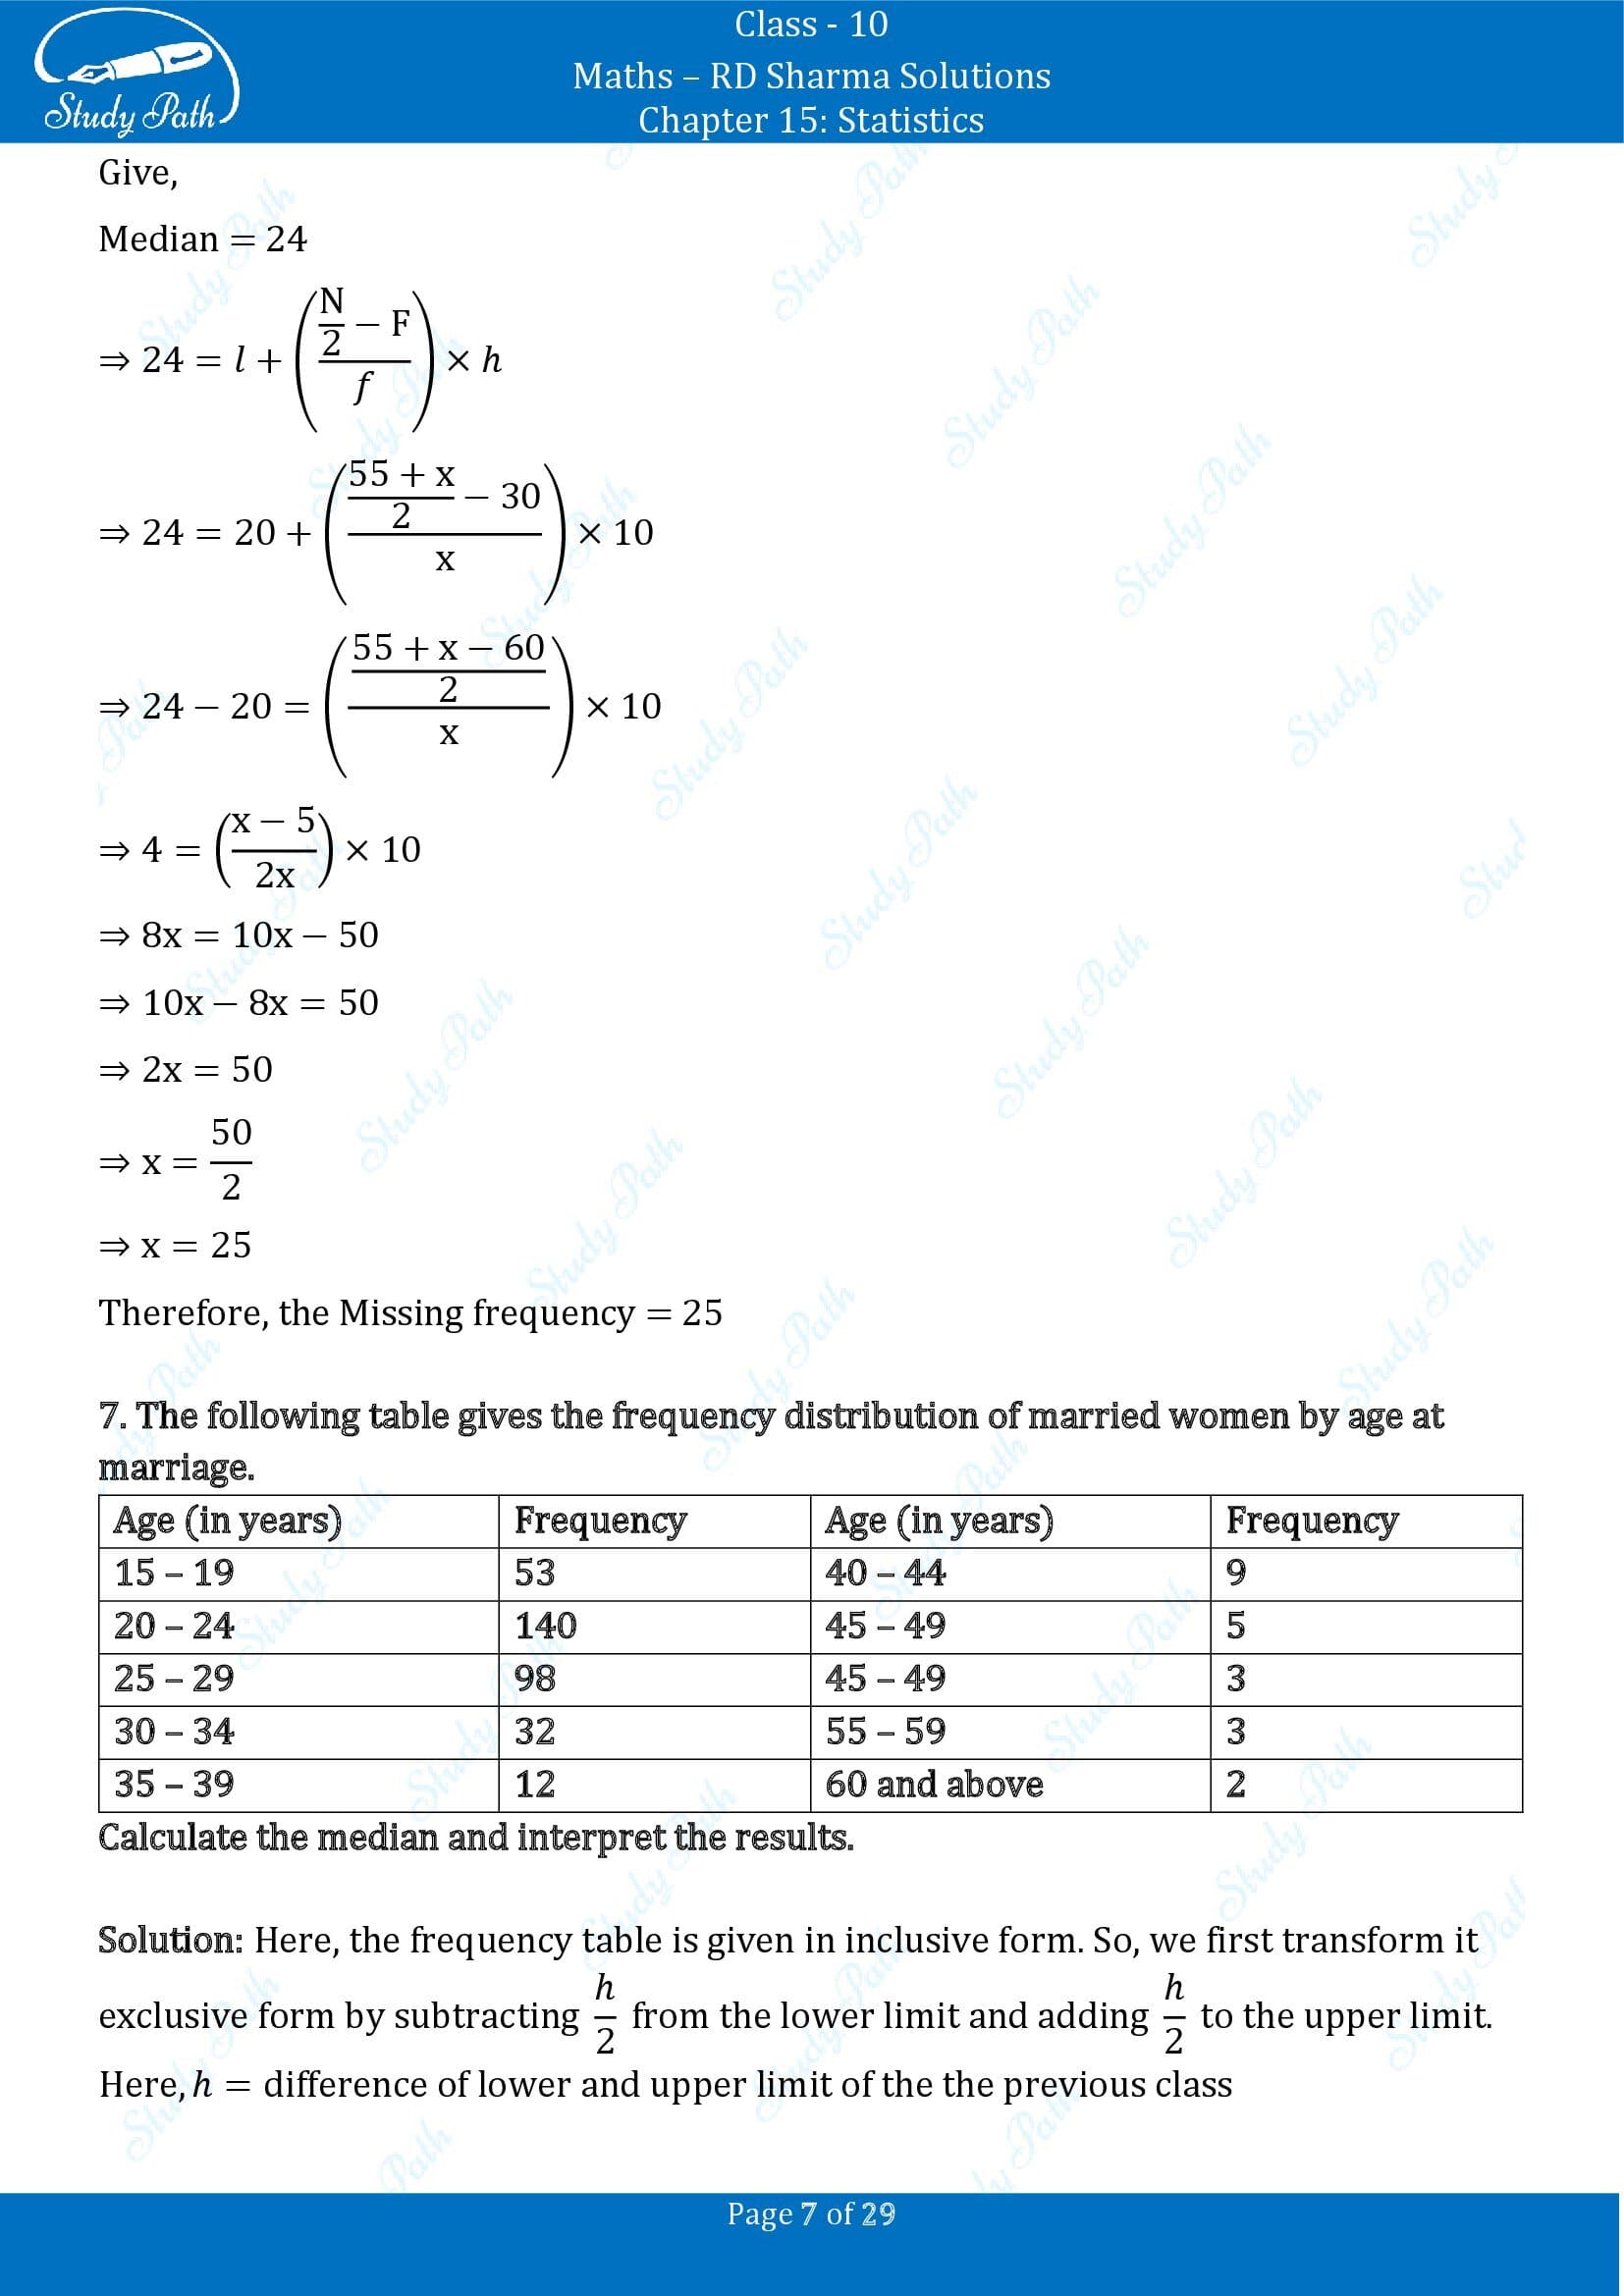 RD Sharma Solutions Class 10 Chapter 15 Statistics Exercise 15.4 00007